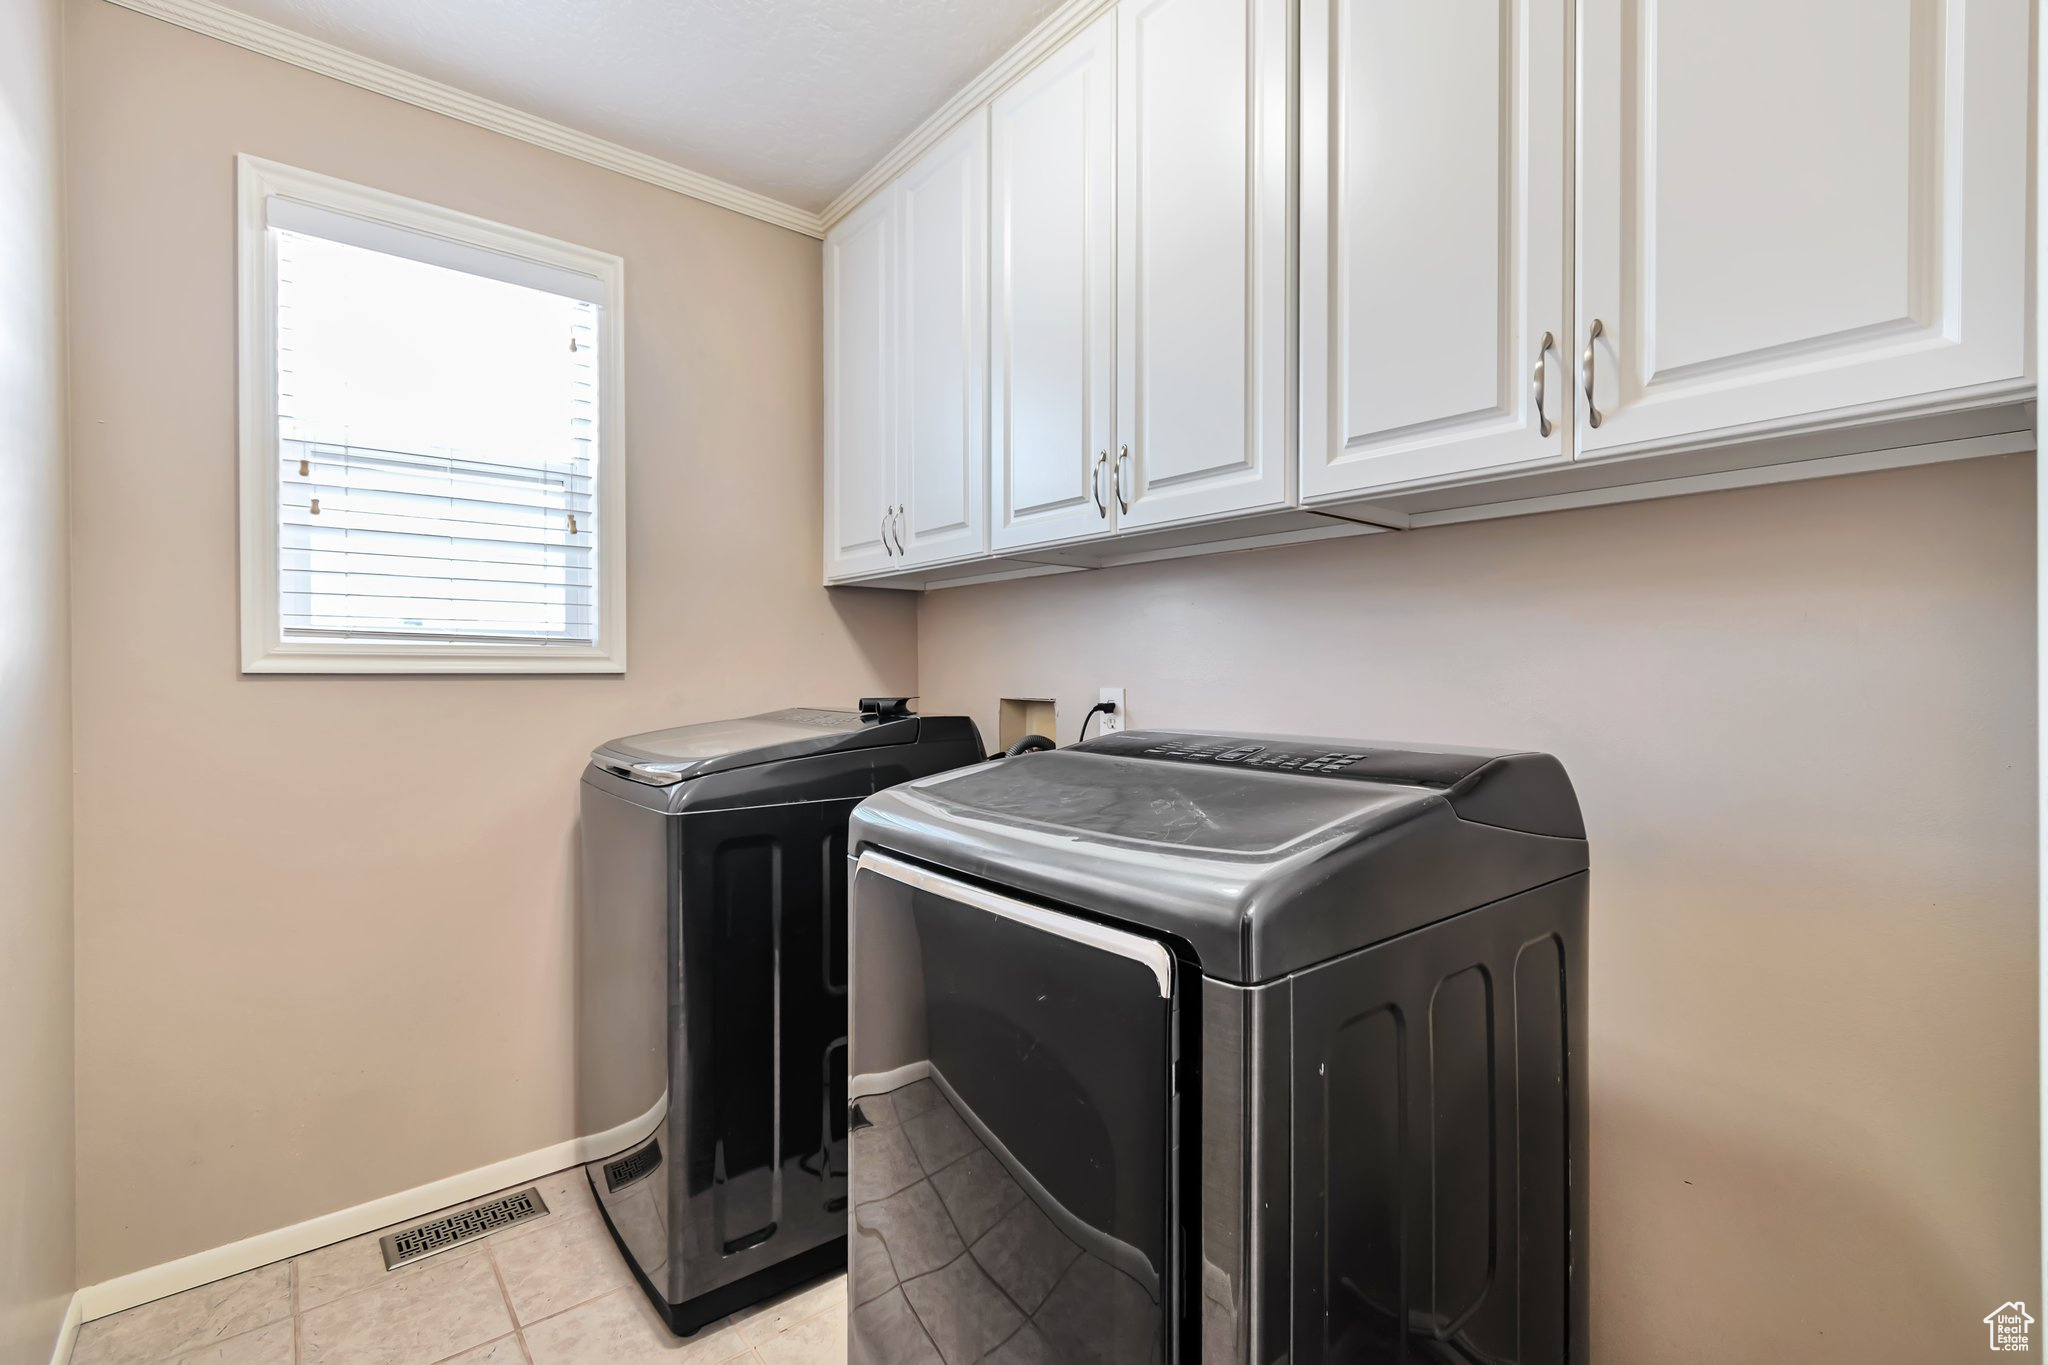 Laundry room featuring washer and dryer (gas and electric hookup), top cabinets for storage, and light tile flooring